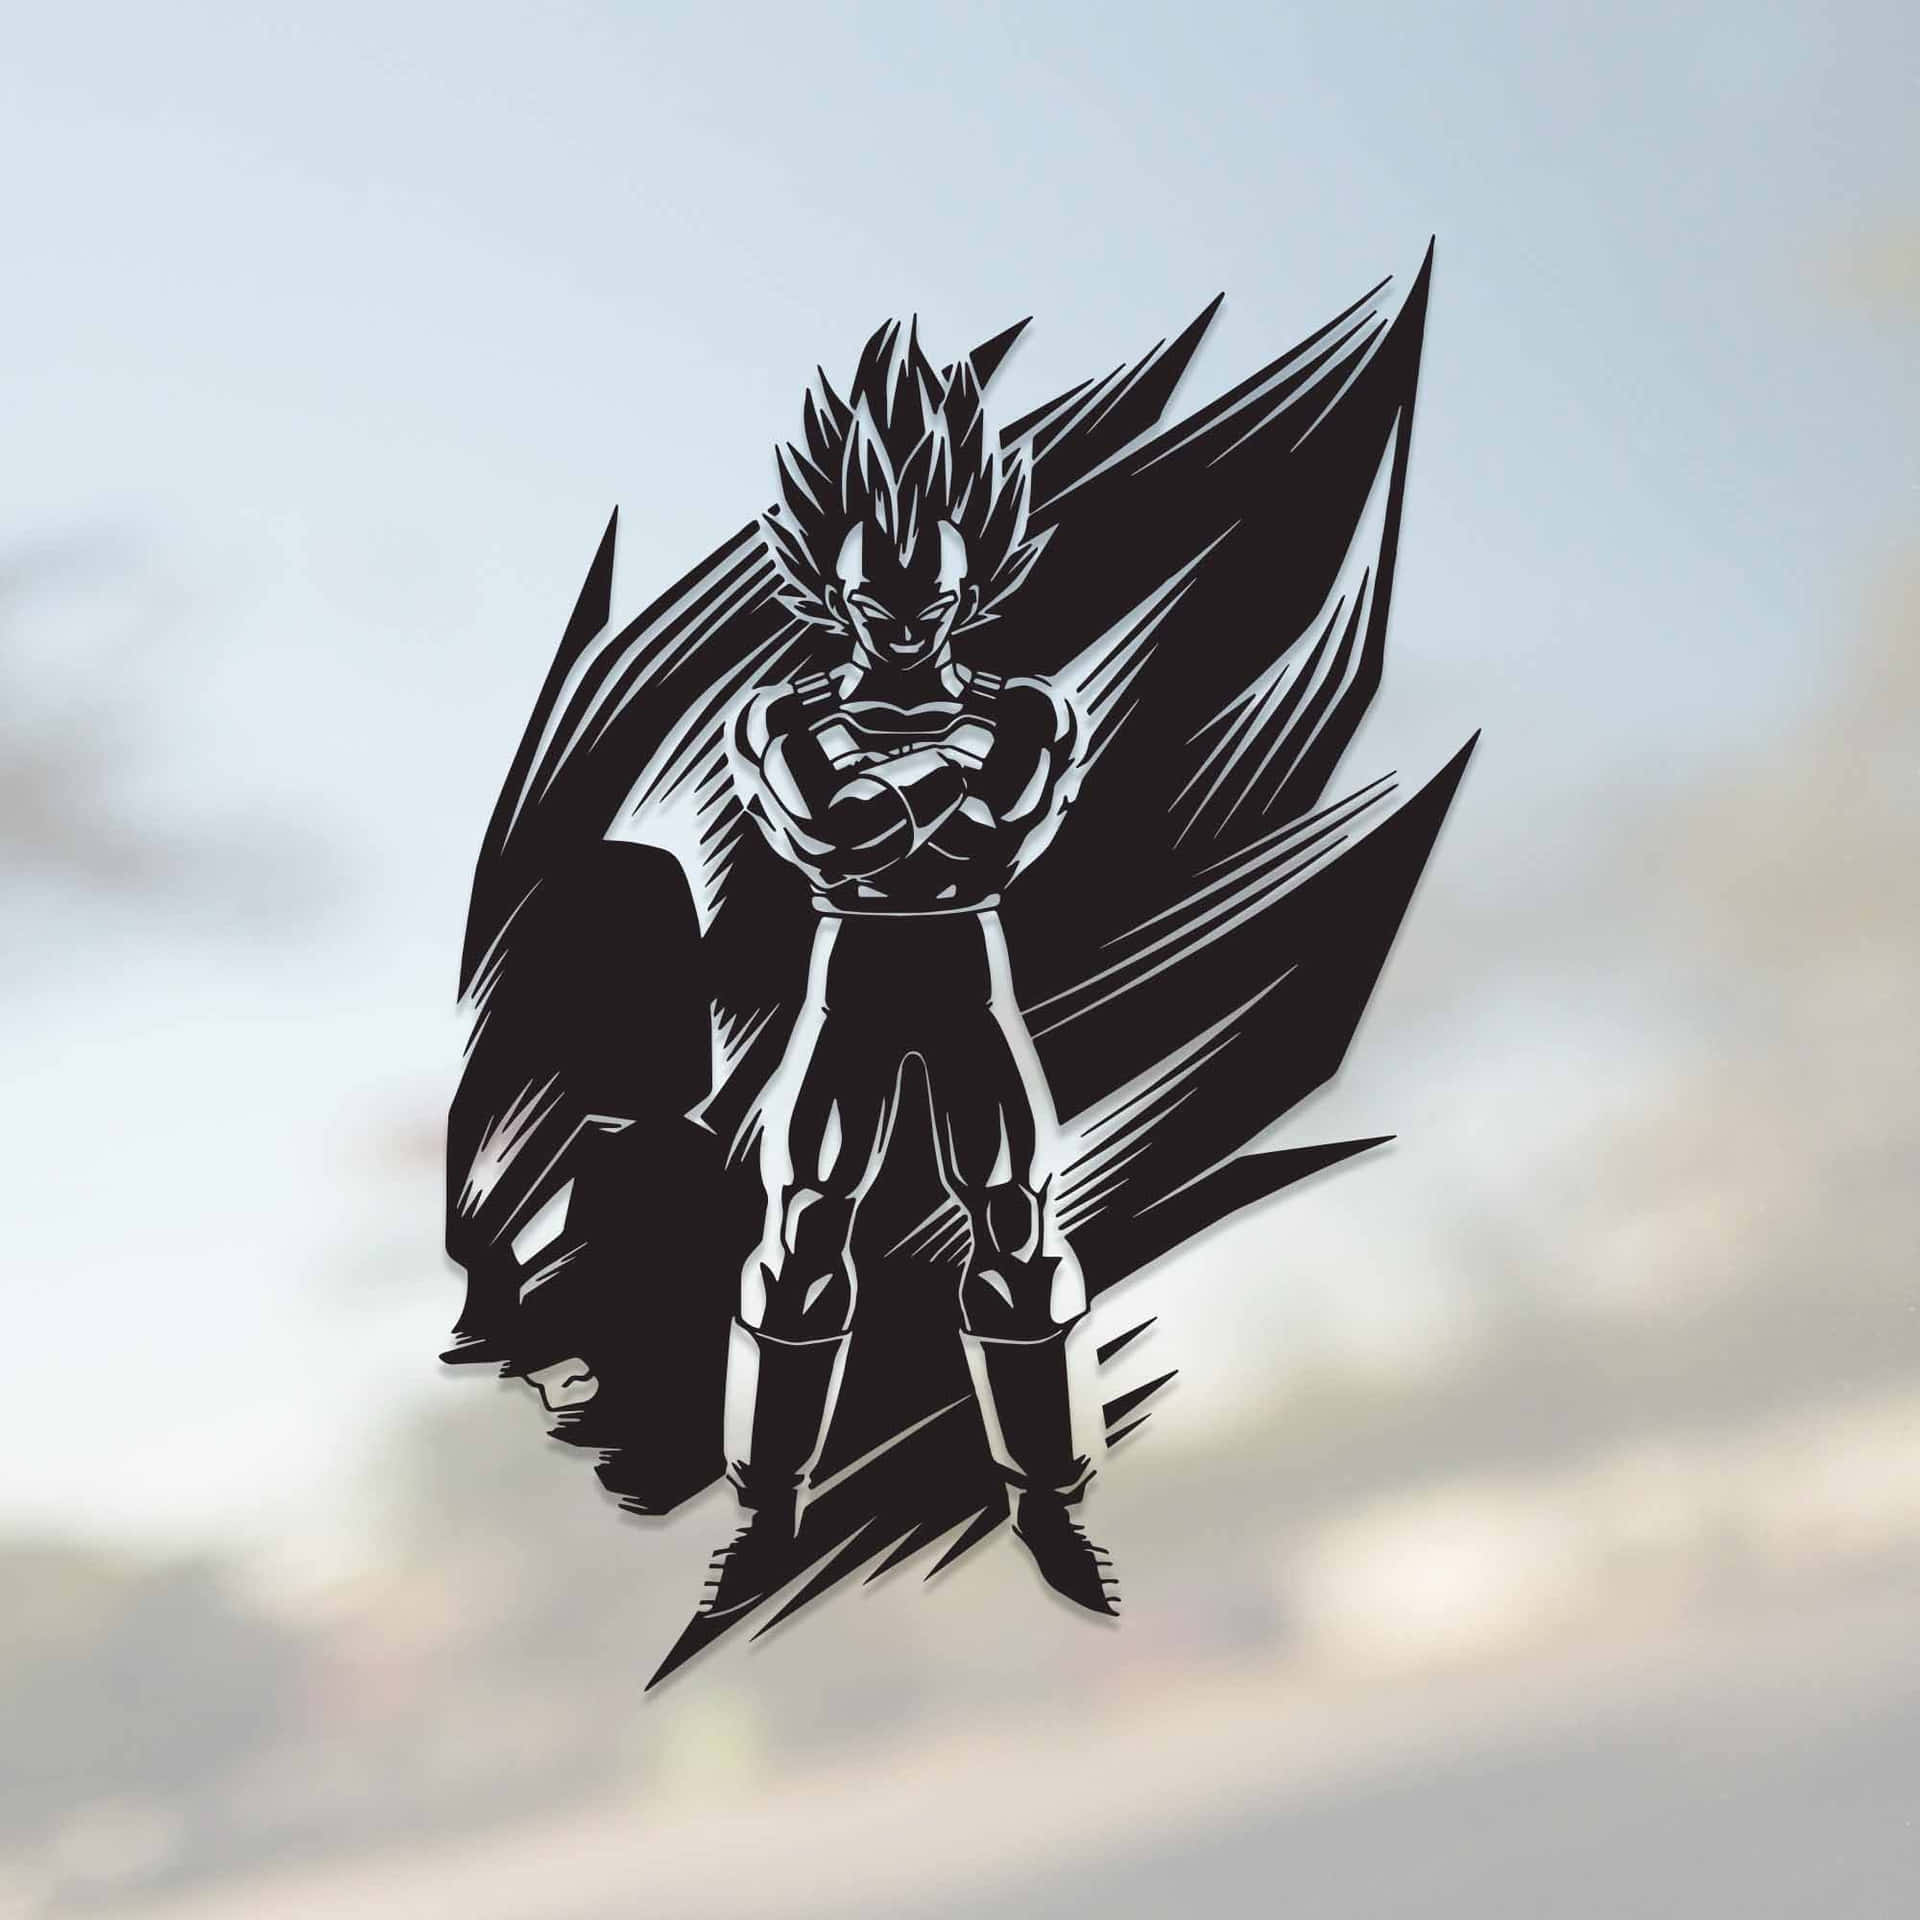 Vegeta In His Black and White Form Wallpaper